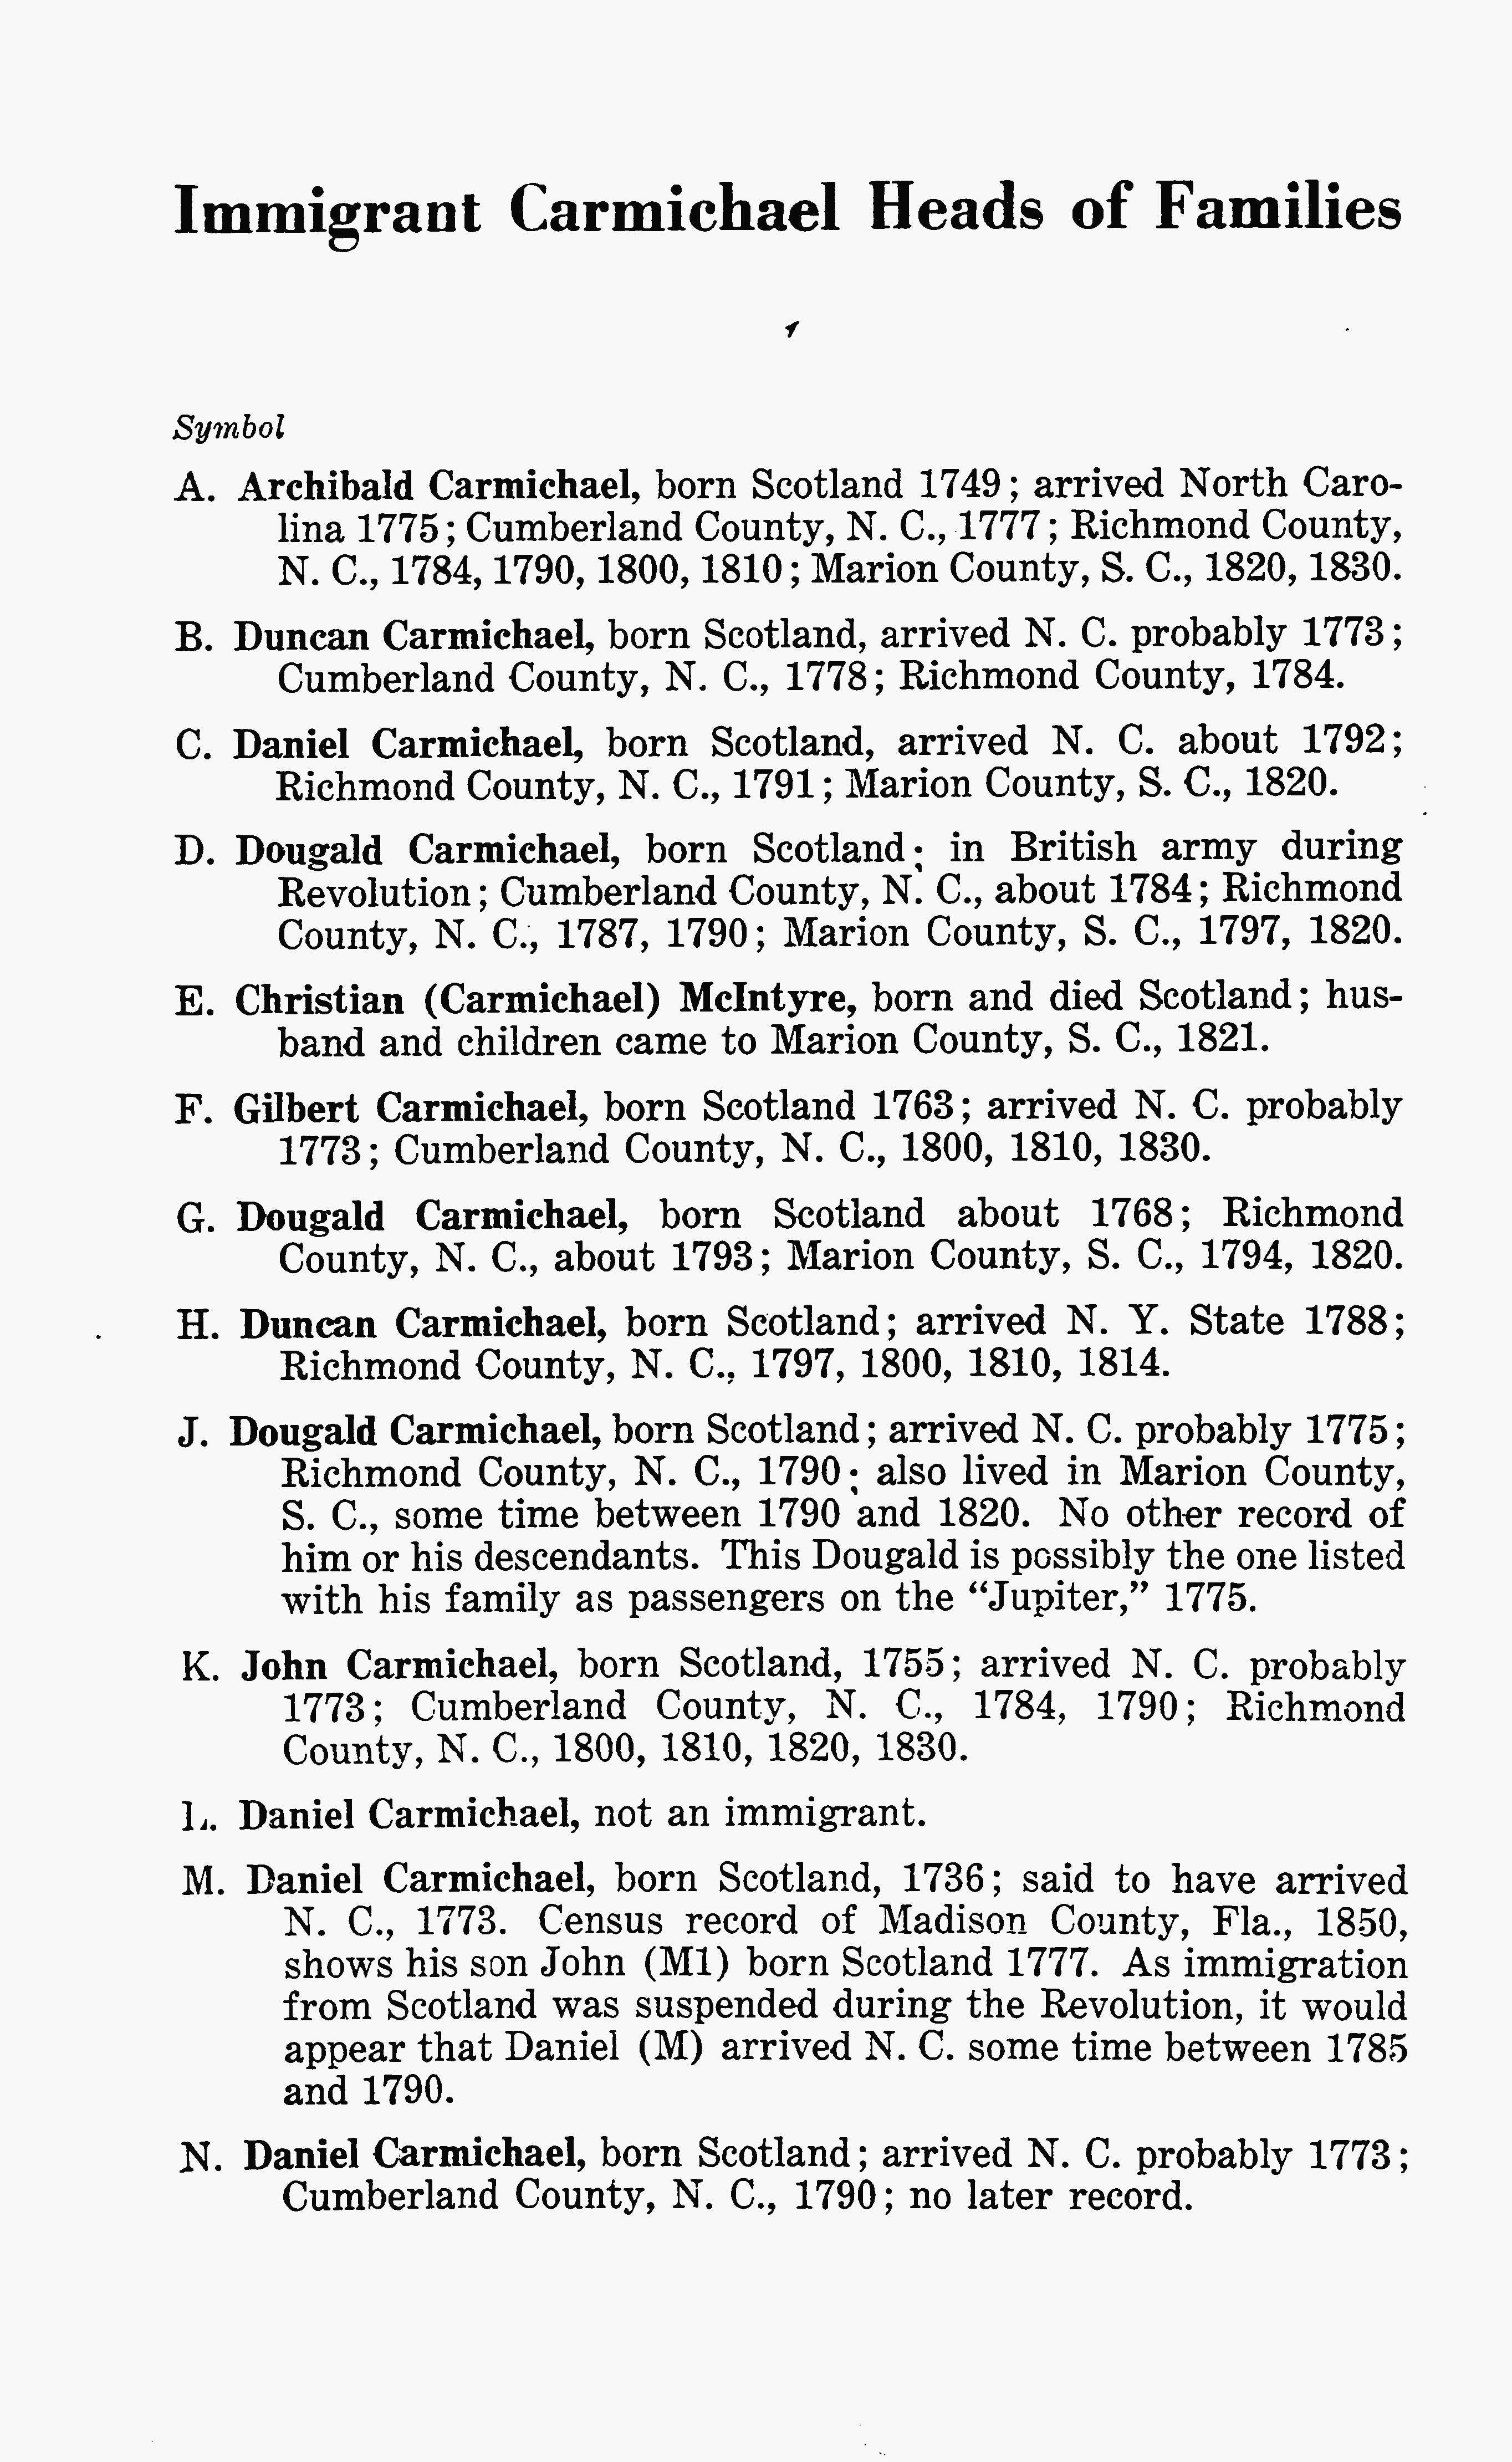 Scottish Highlanders of the Carolinas - index to immigrants, Linked To: <a href='profiles/i15683.html' >John `Ban` Carmichael (K)</a> and <a href='profiles/i15674.html' >Duncan Carmichael (H) 🧬</a> and <a href='profiles/i15462.html' >Dougald Carmichael (D) 🧬</a> and <a href='profiles/i15447.html' >Gilbert Carmichael (F) 🧬</a>